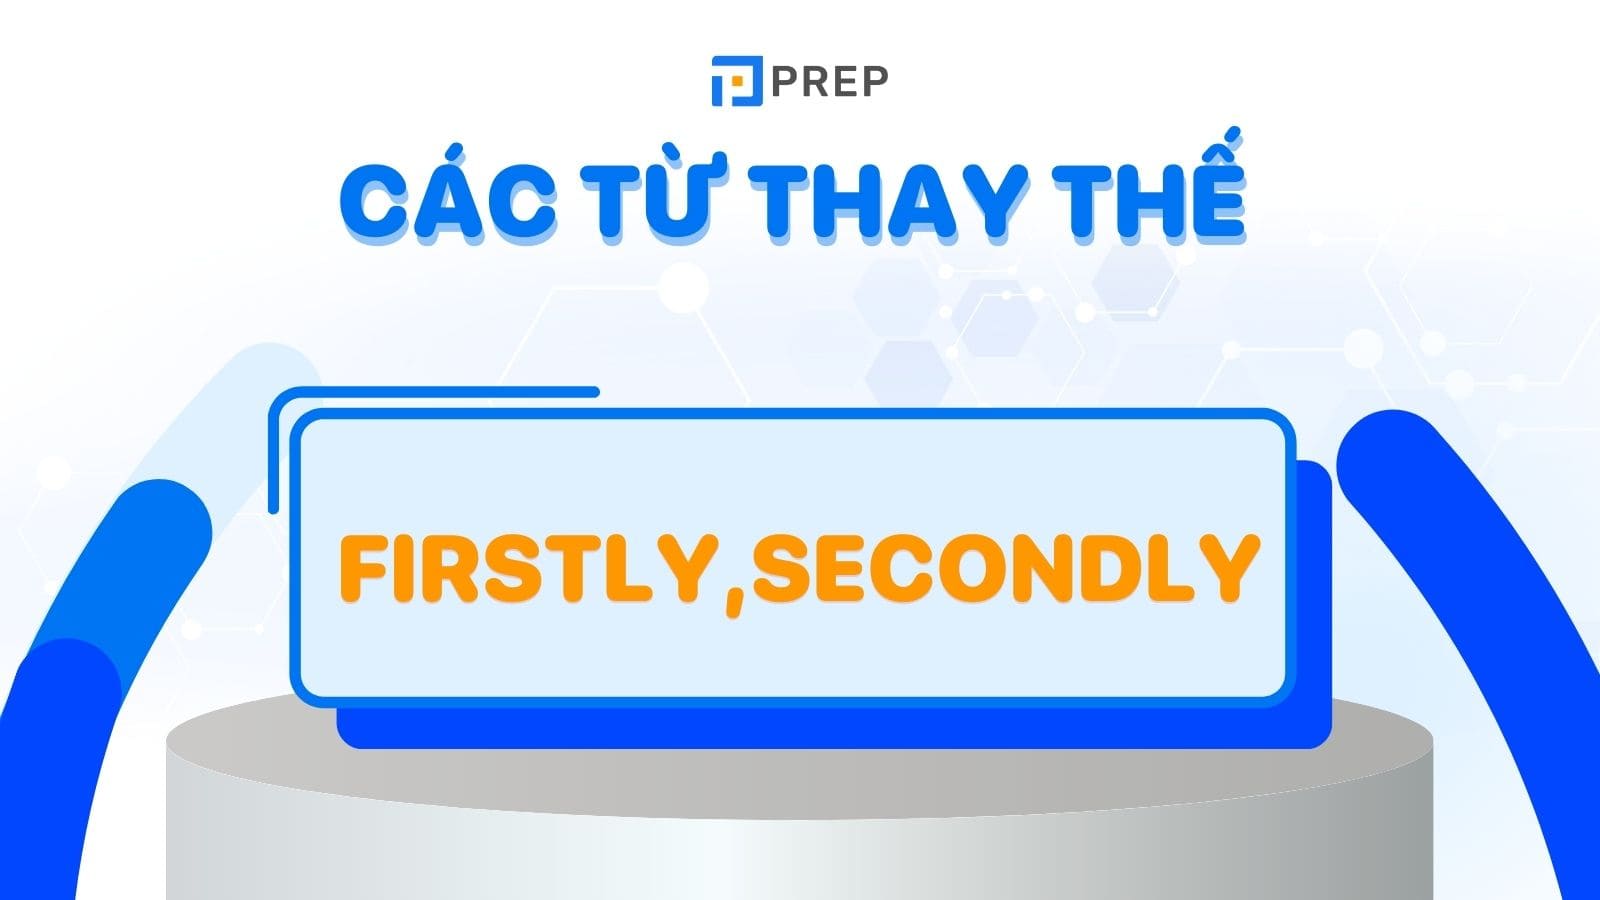 cac-tu-thay-the-cho-firstly-secondly.jpg